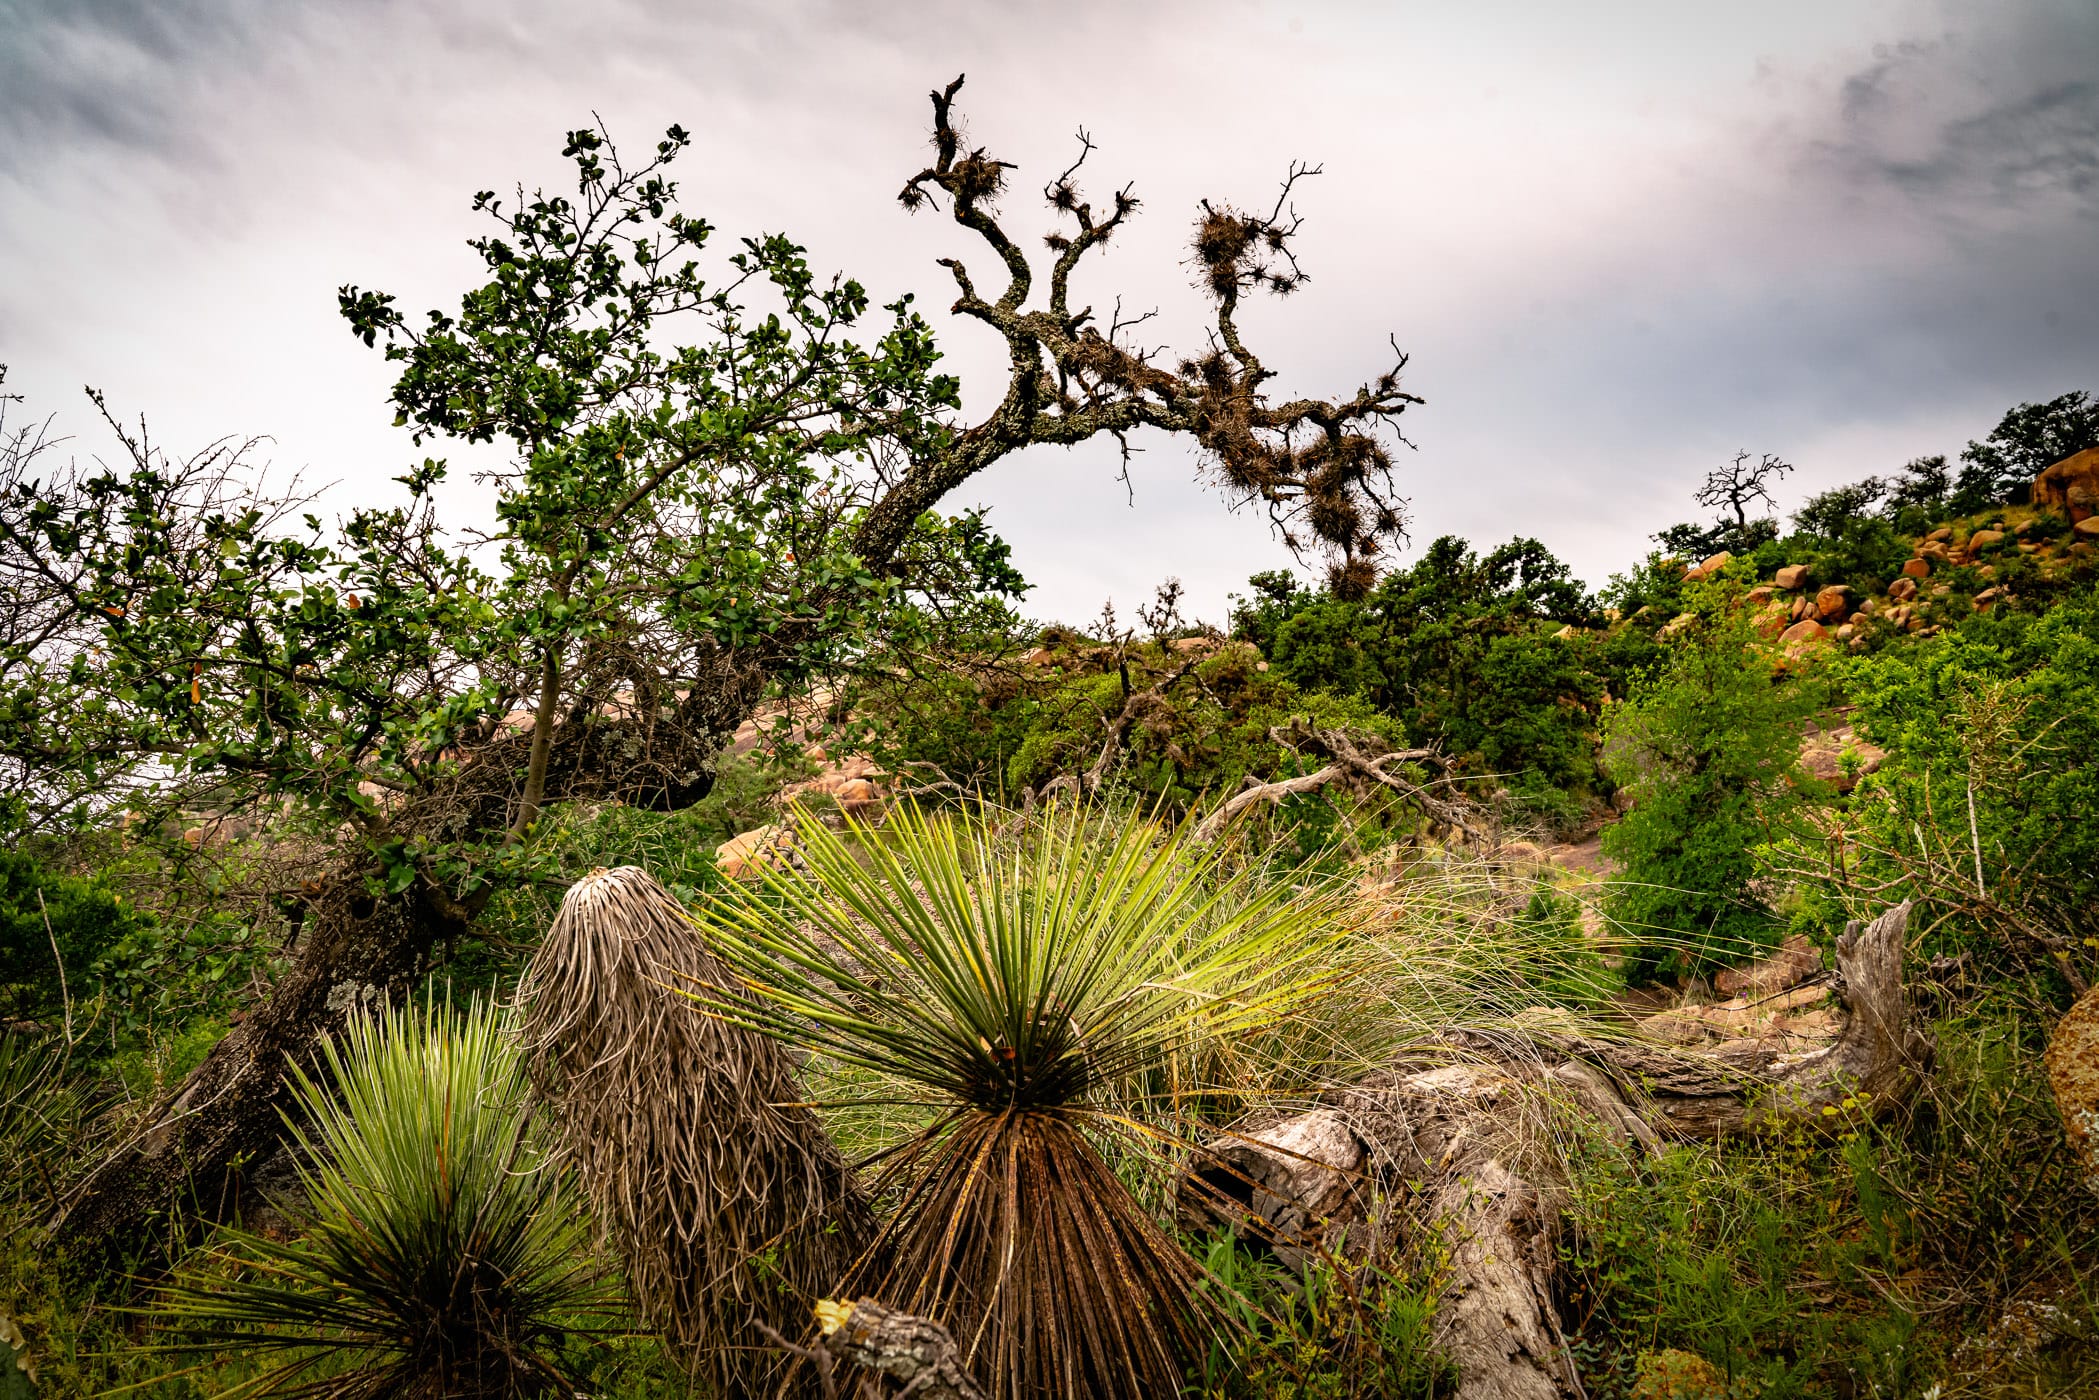 Trees and yucca grow on the rugged landscape of Texas' Enchanted Rock.